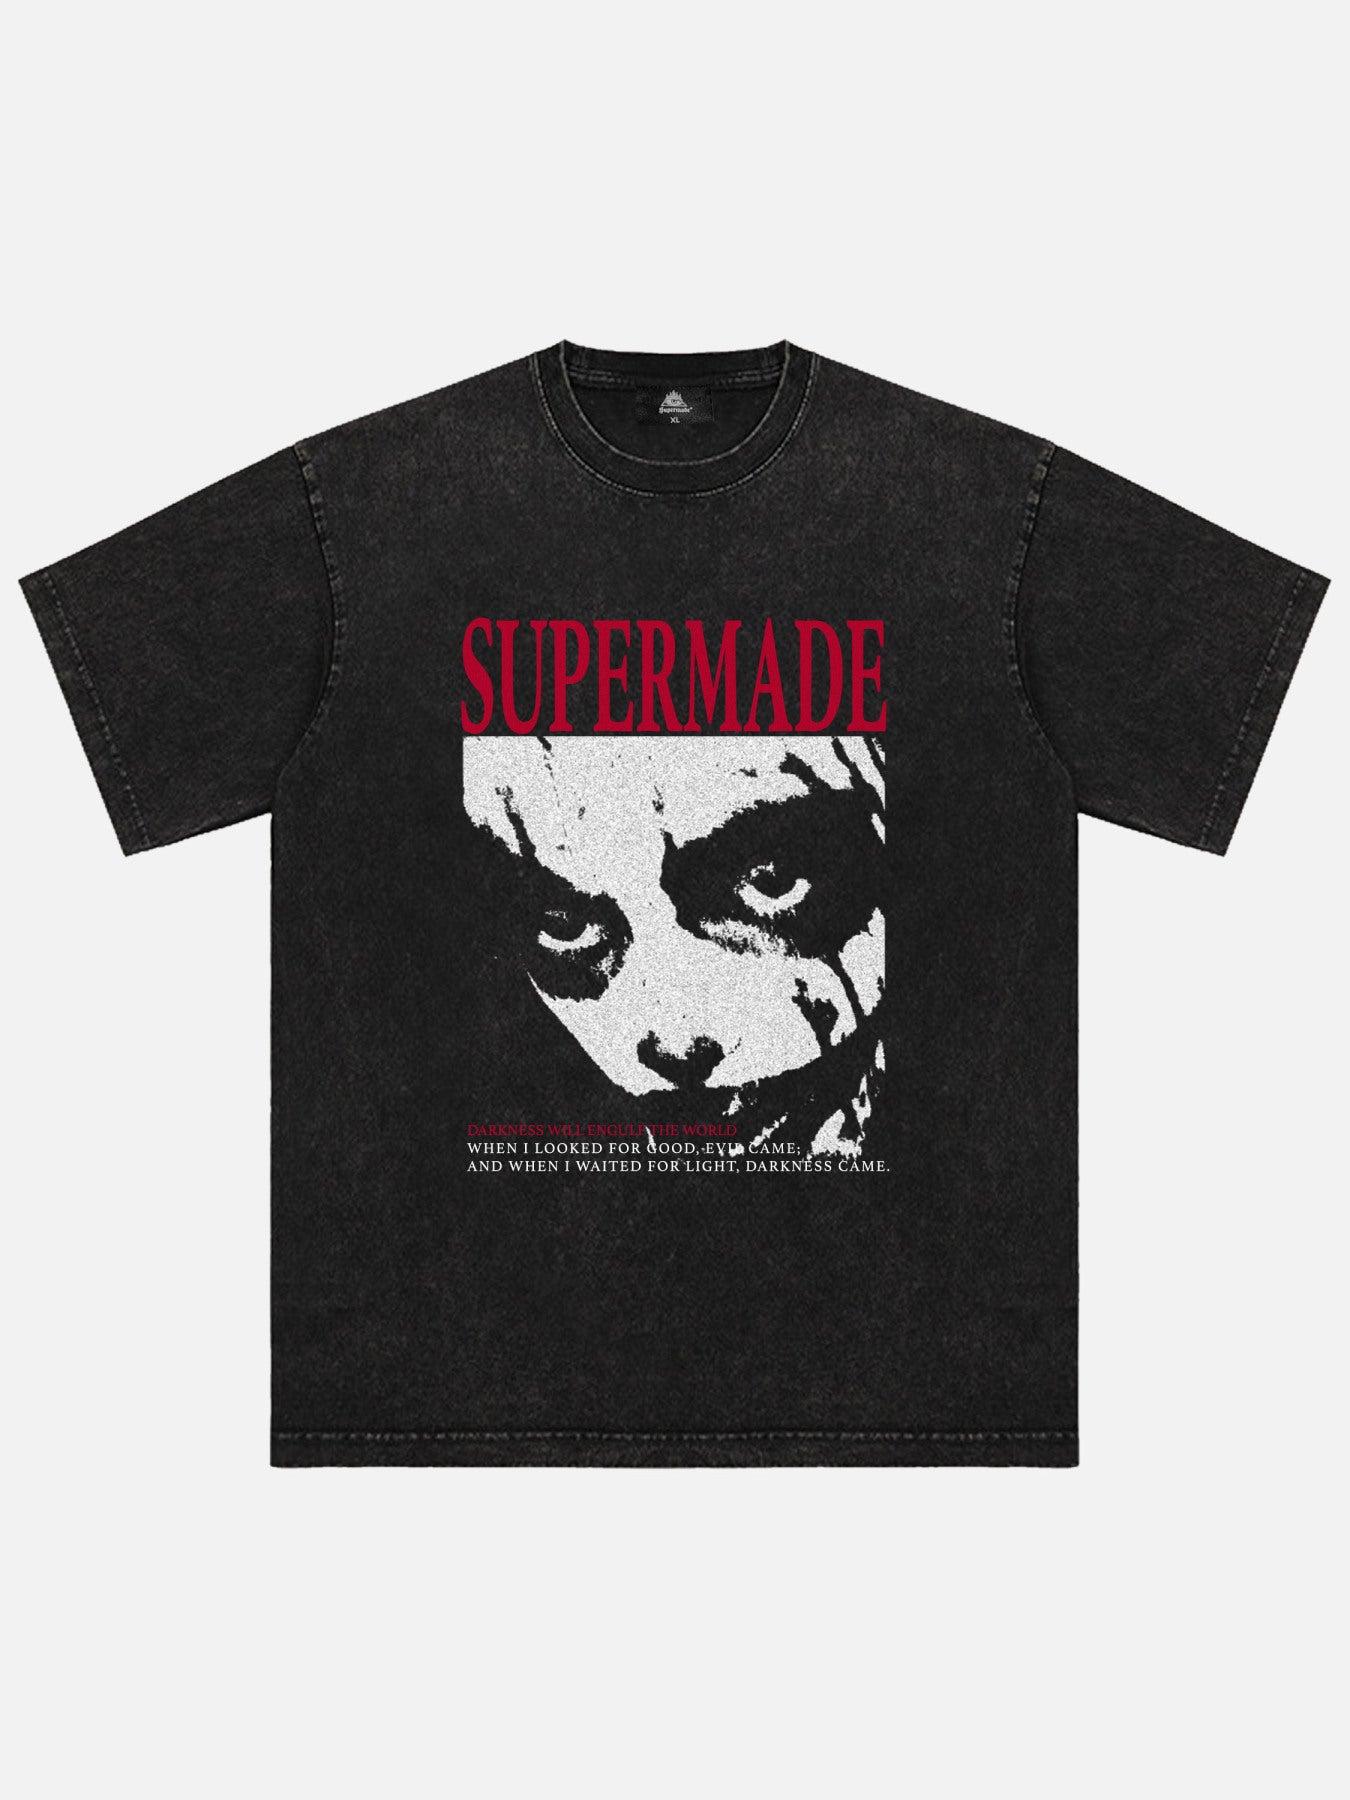 The Supermade Washed Portrait Print T-shirt